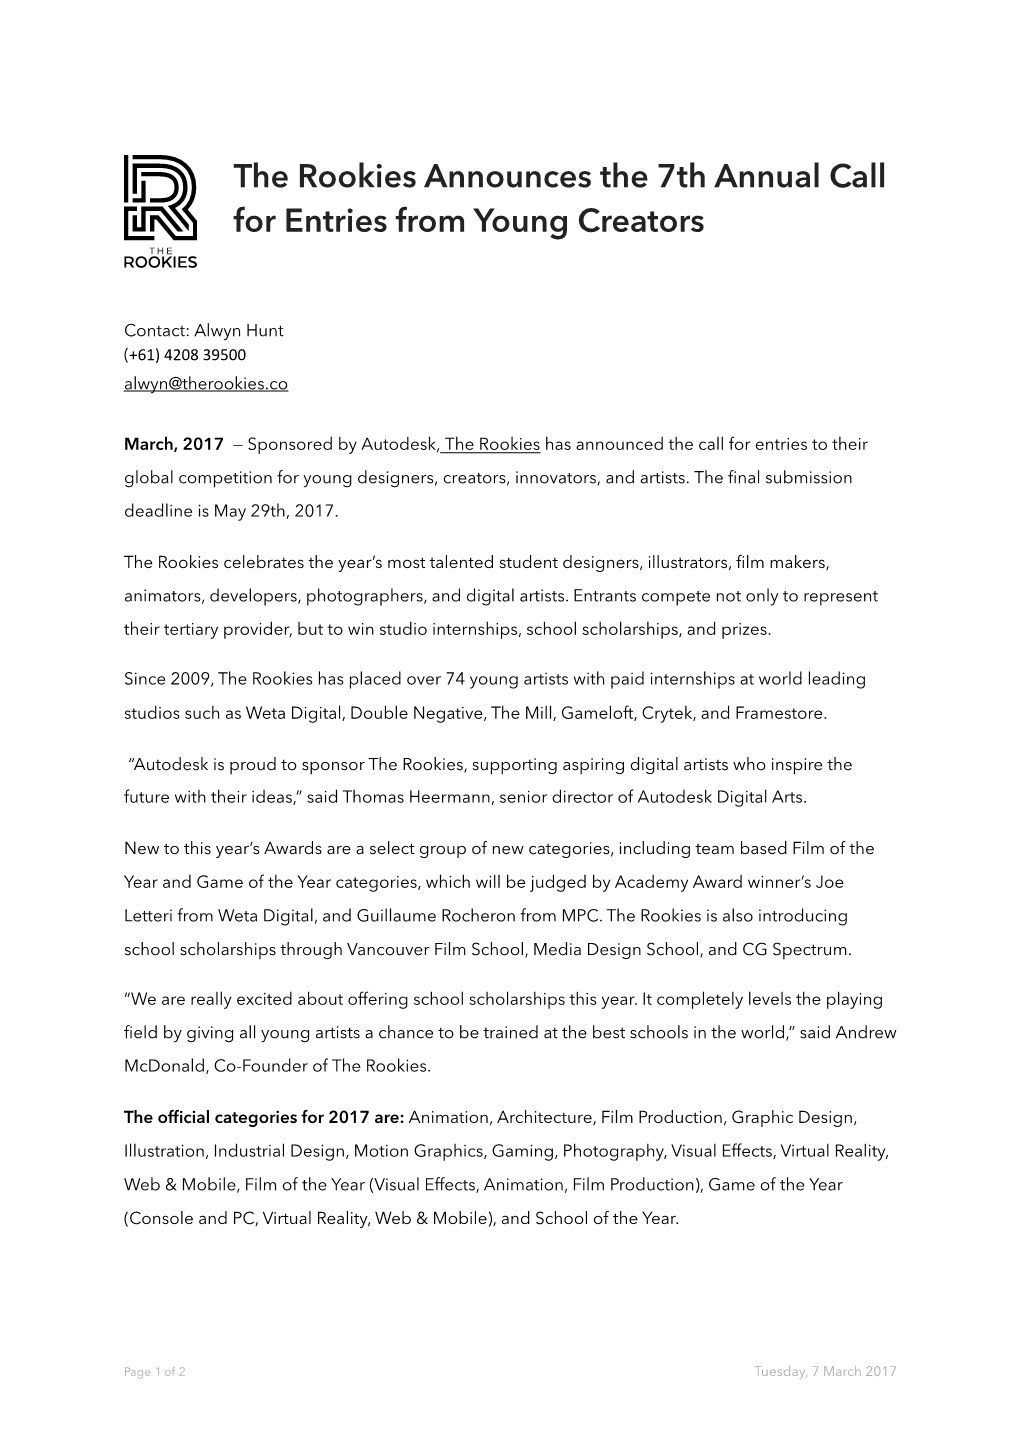 The Rookies Announces the 7Th Annual Call for Entries from Young Creators